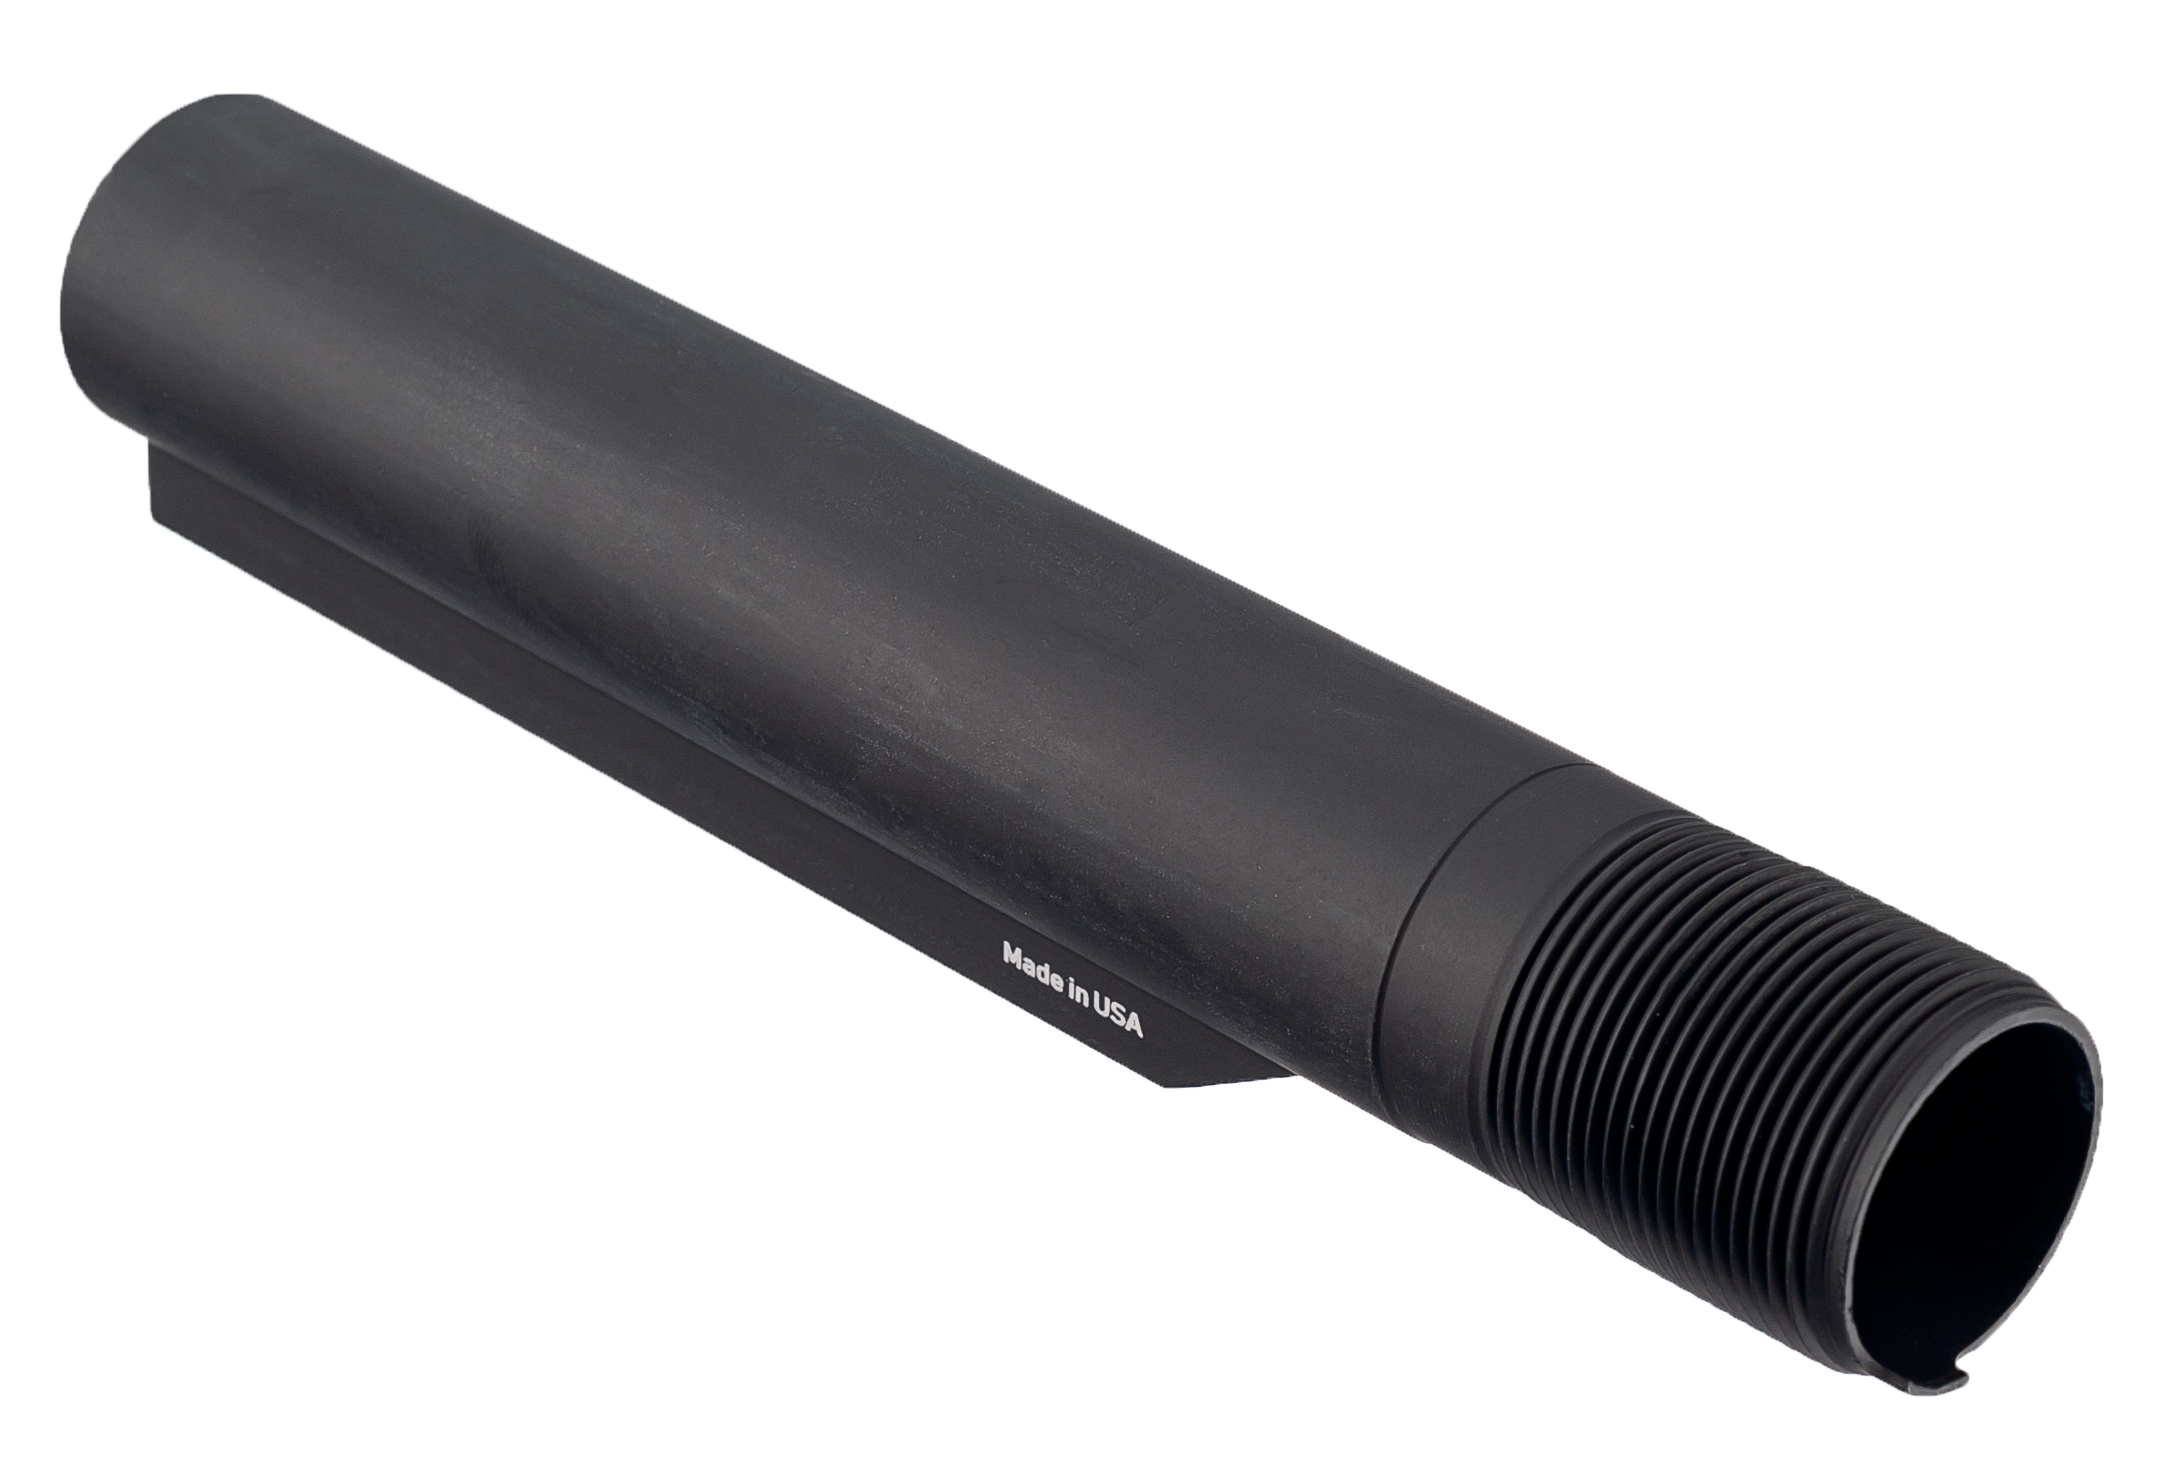 Check out this Black anodized carbine buffer that's sure to make your AR...